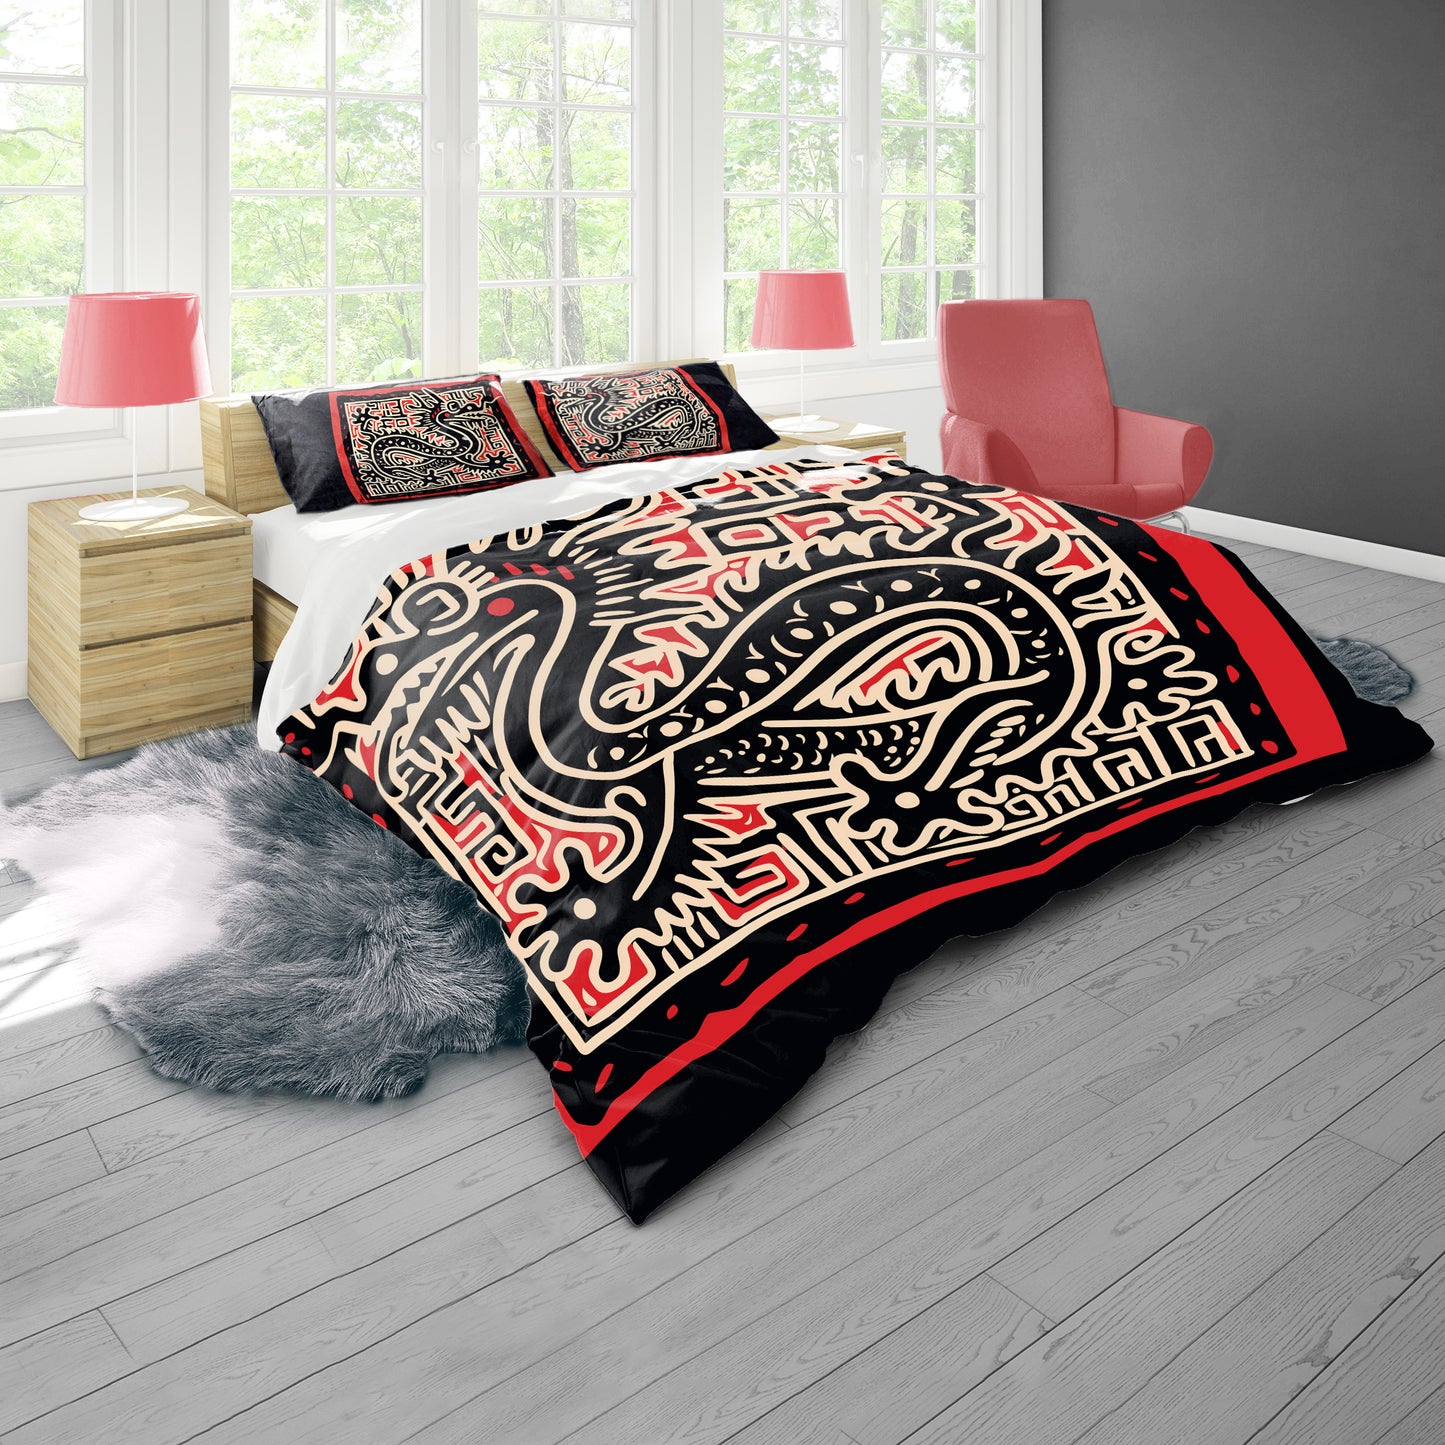 Chinese Black and Red Dragon by Wikus Schalkwyk Duvet Cover Set